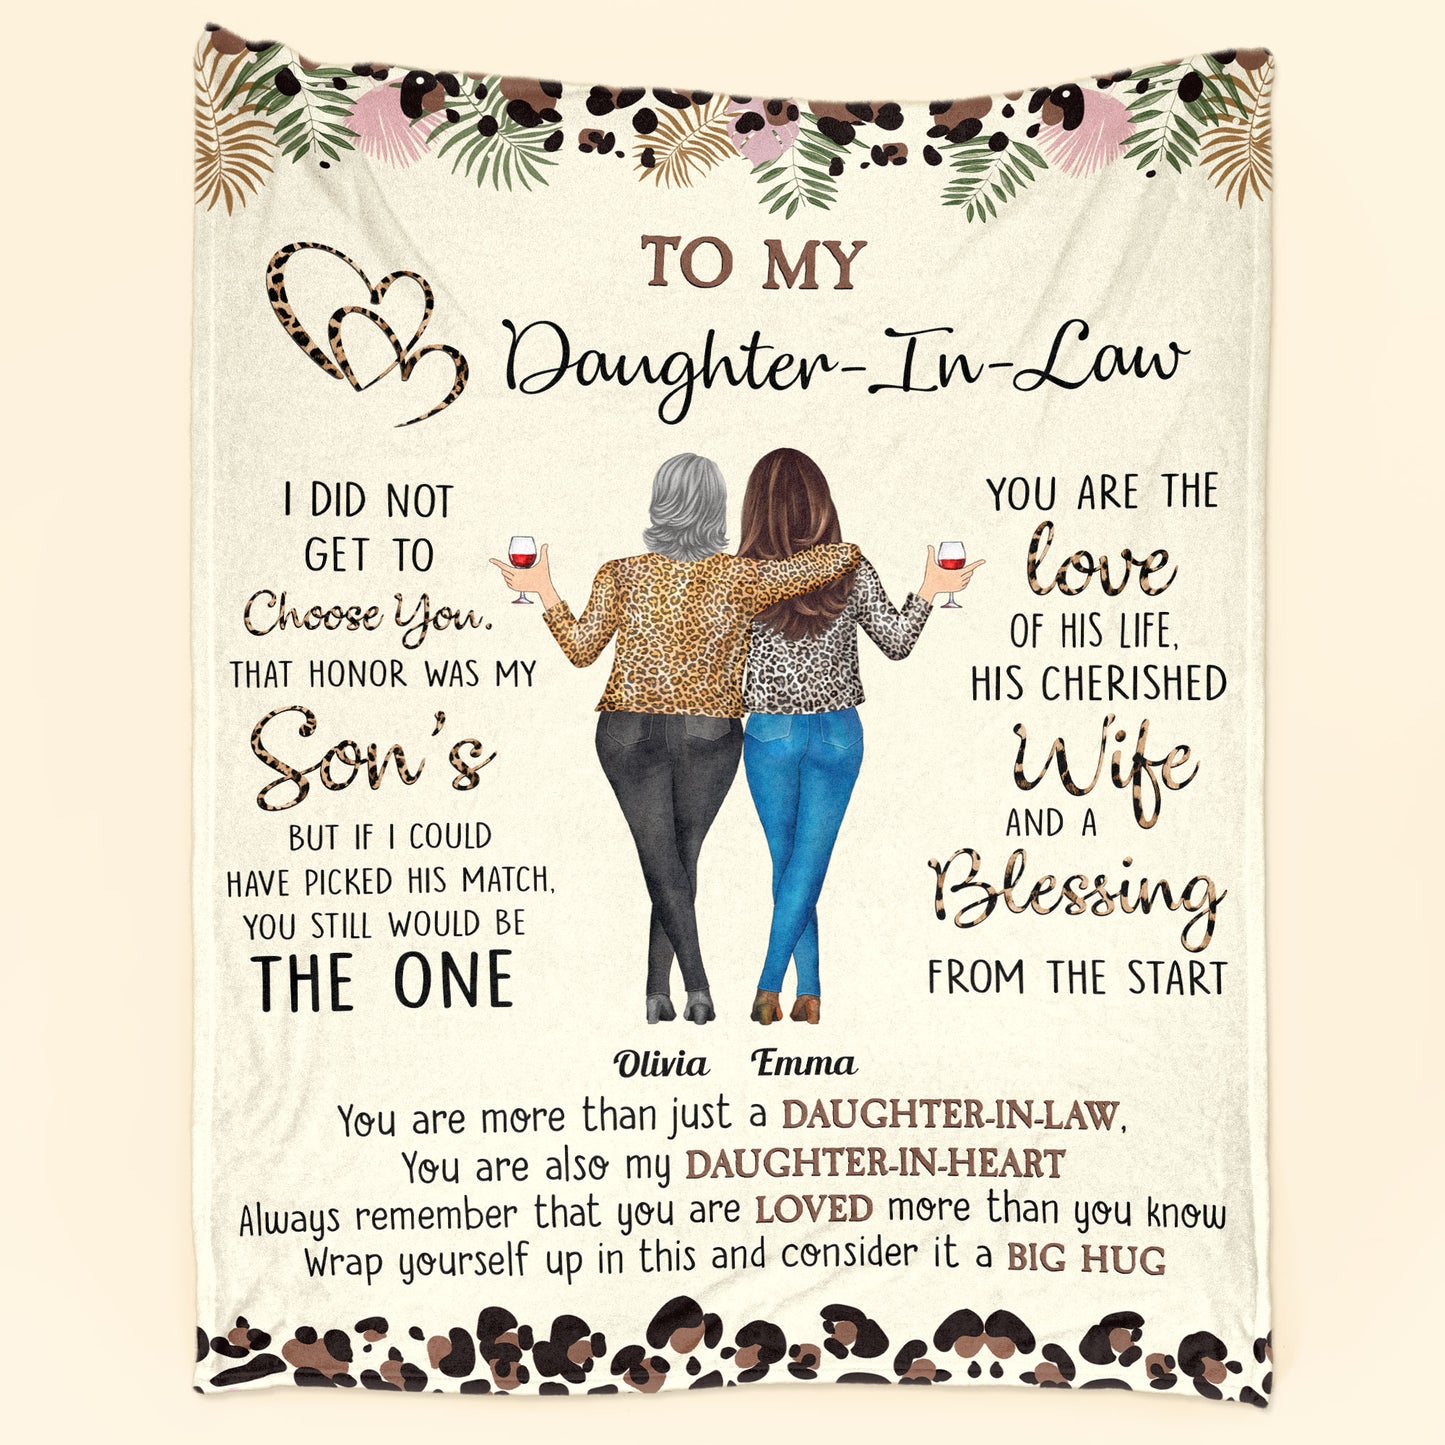 To My Daughter-In-Law You Are My Daughter-In-Heart - Personalized Blanket